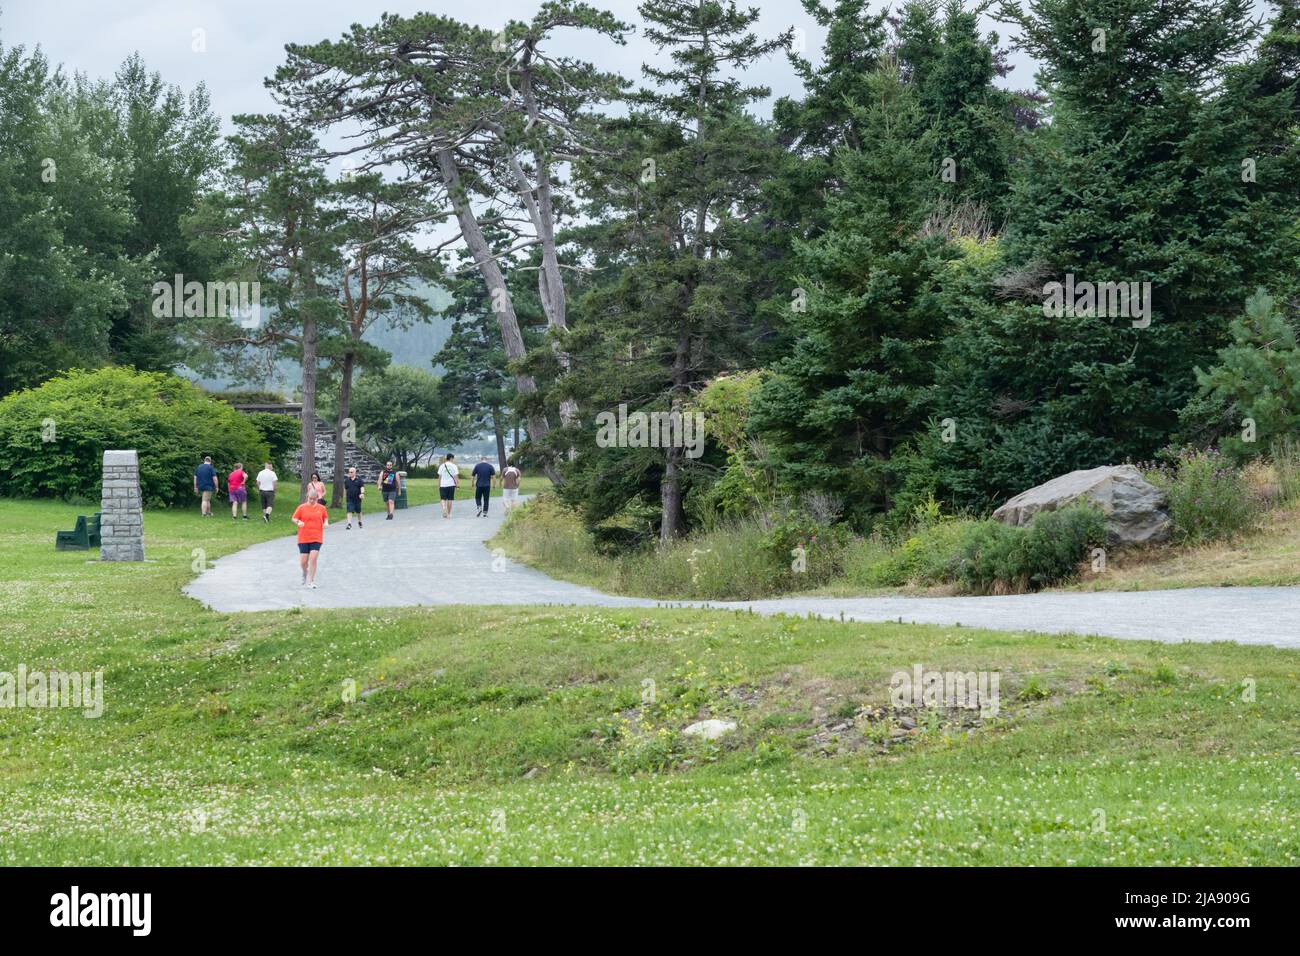 Halifax, Nova Scotia, Canada - 10 August 2021: People walking and running in Point Pleasant Park Stock Photo